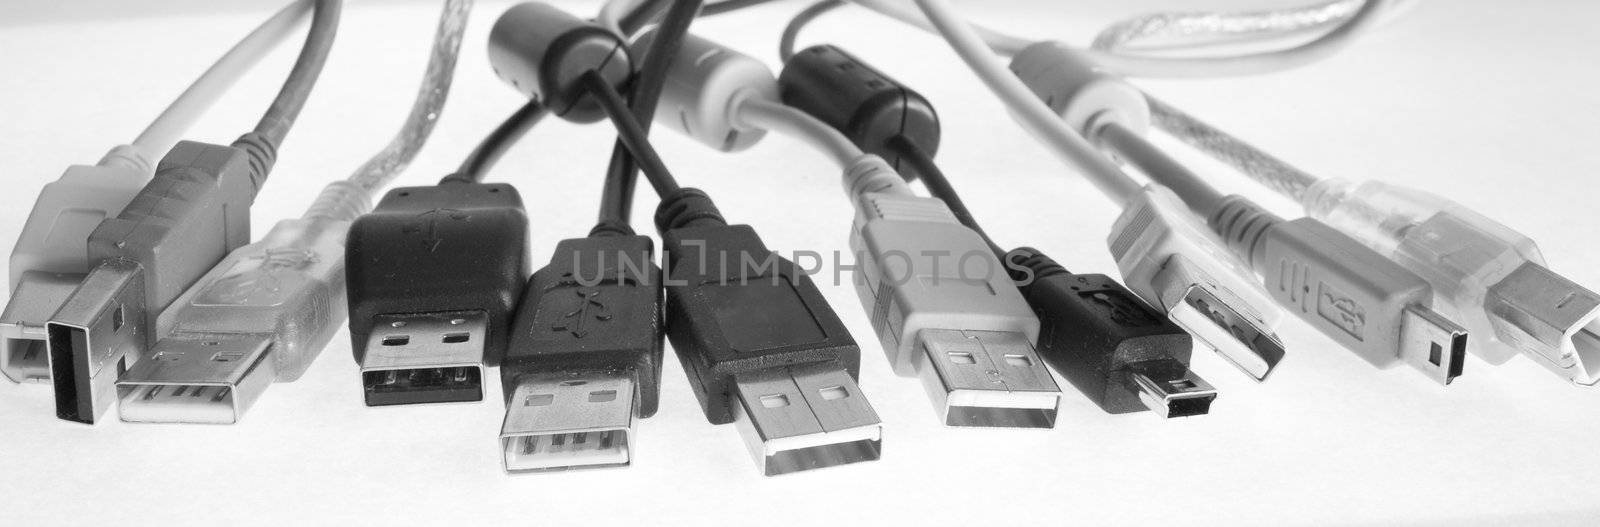 USB cables with plugs lay in a number(line), wires are chaotically bound